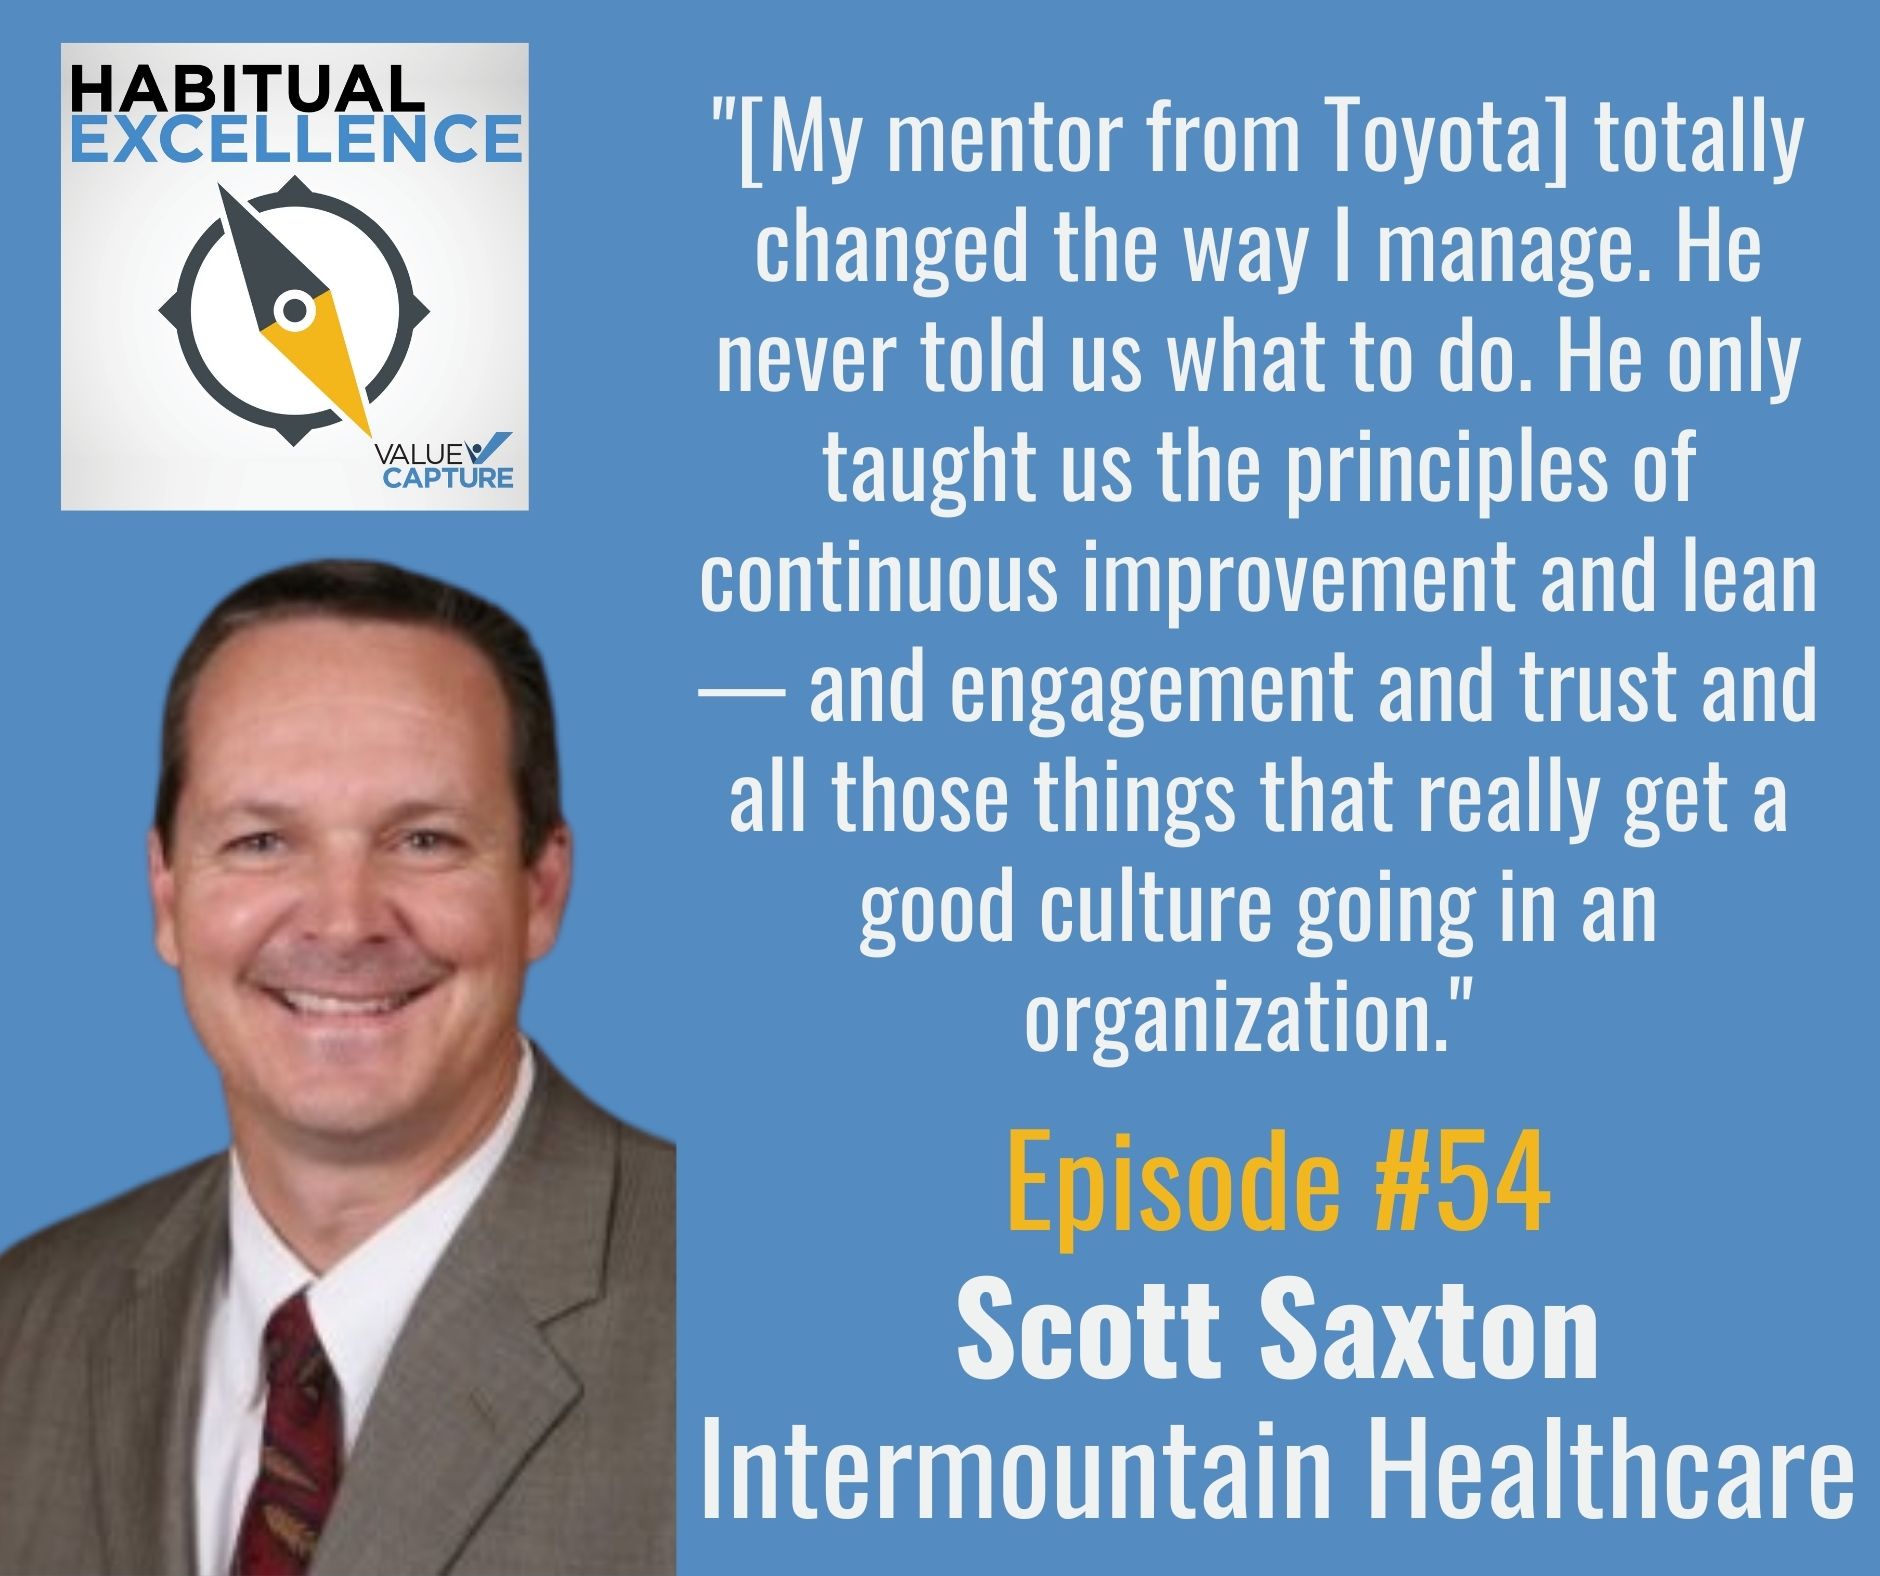 "[My mentor from Toyota] totally changed the way I manage. He never told us what to do. He only taught us the principles of continuous improvement and lean — and engagement and trust and all those things that really get a good culture going in an organization." 